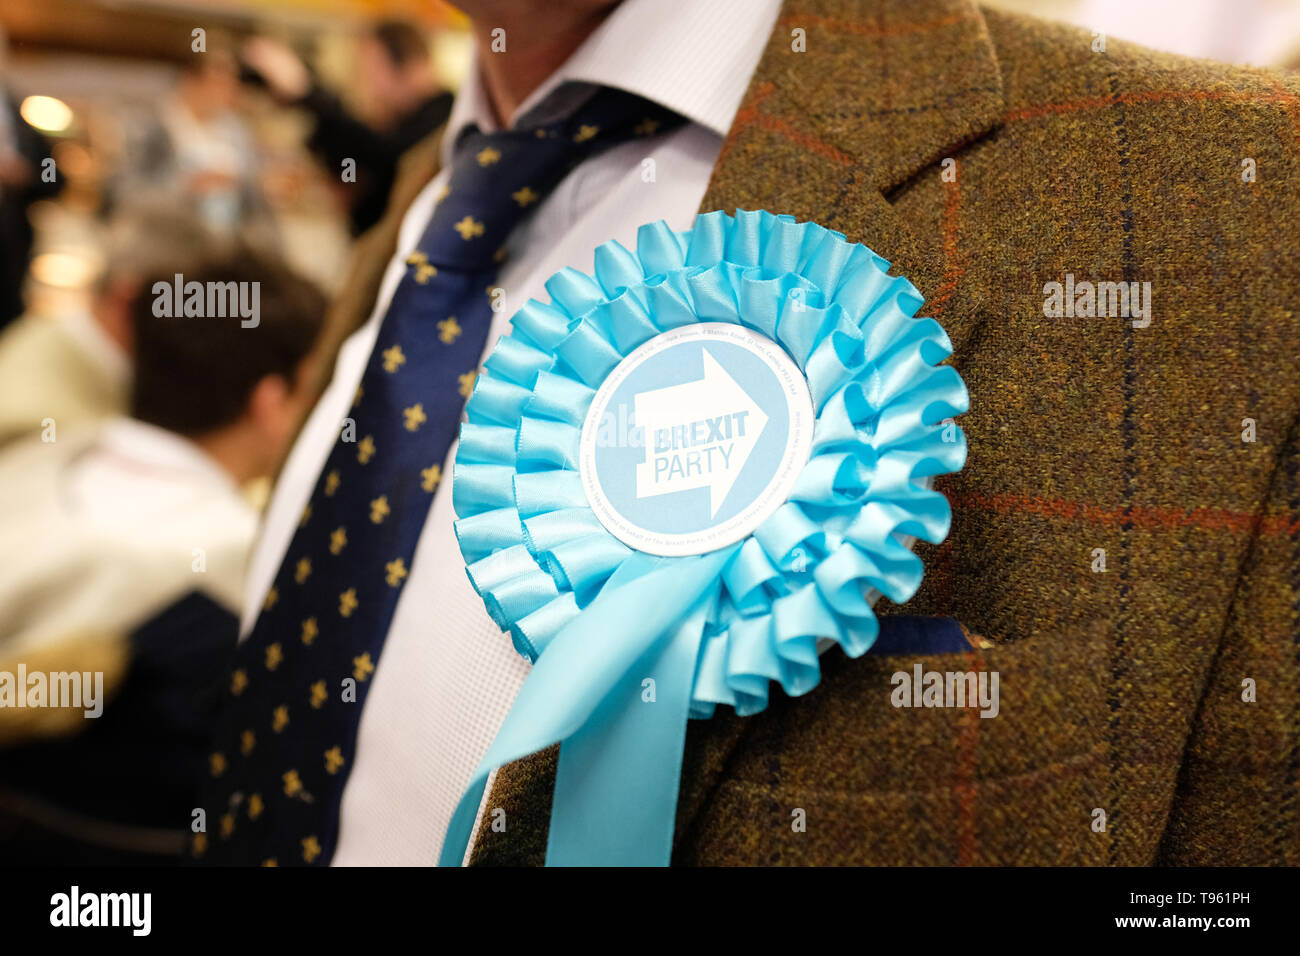 Dudley, West Midlands, England, UK - Friday 17th May 2019 – A Brexit Party candidate wears a rosette during the Brexit Party tour event at Dudley, West Midlands ahead of next weeks European Parliament elections – The town of Dudley voted 67% in favour of leaving the EU in the 2016 referendum. Photo Steven May / Alamy Live News Stock Photo